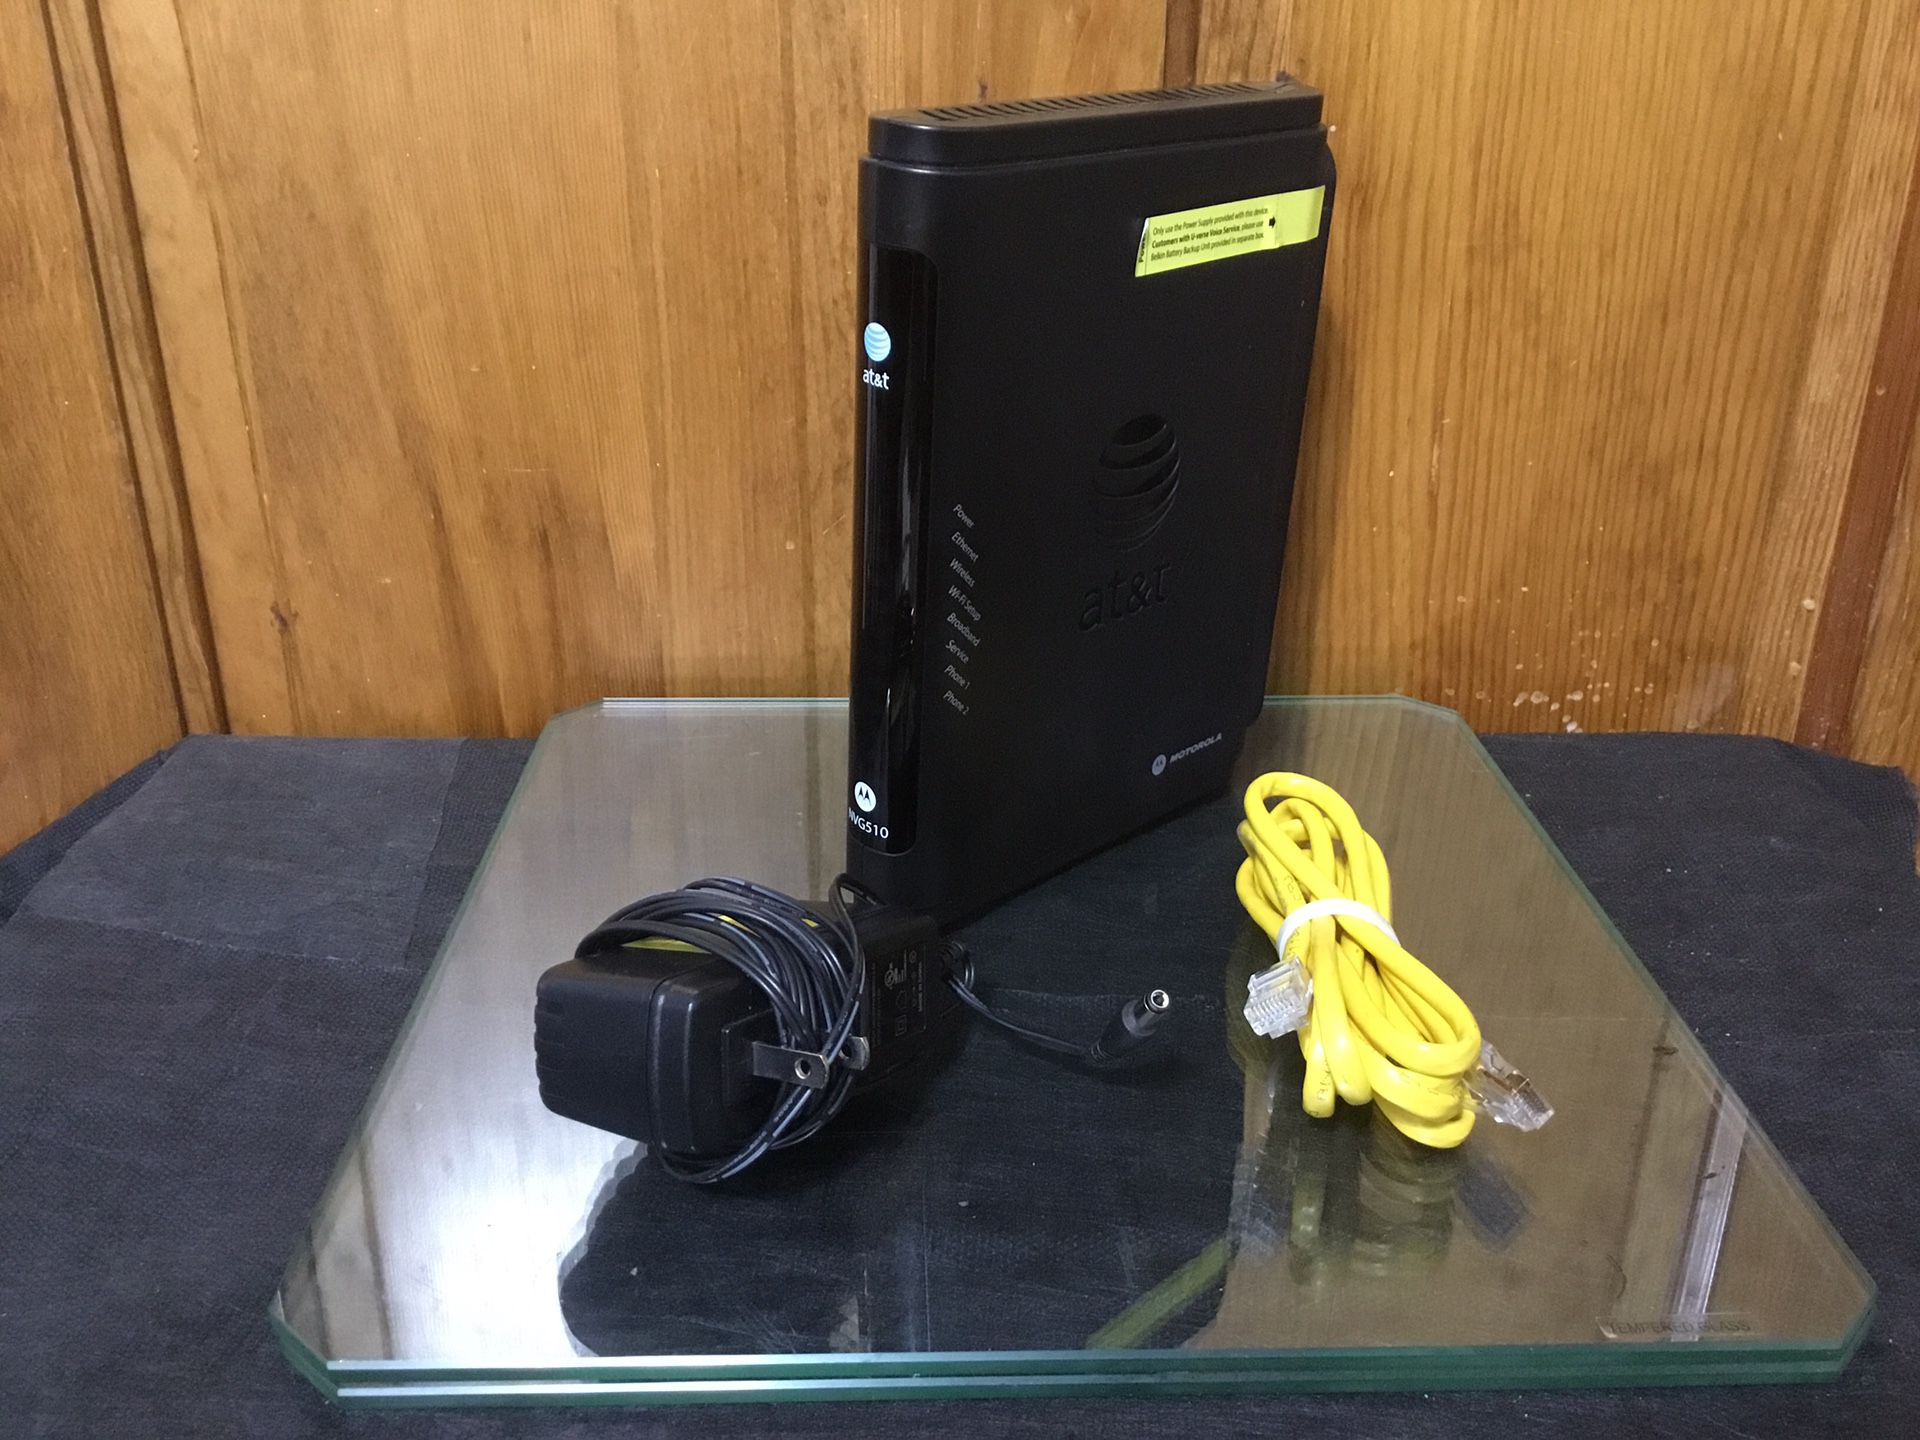 AT&T Motorola NVG510 U-Verse Modem Router Combo 4-port DSL Wireless Like New - Barely Used - Includes Modem, Power Adapter, and Ethernet Cable ONLY